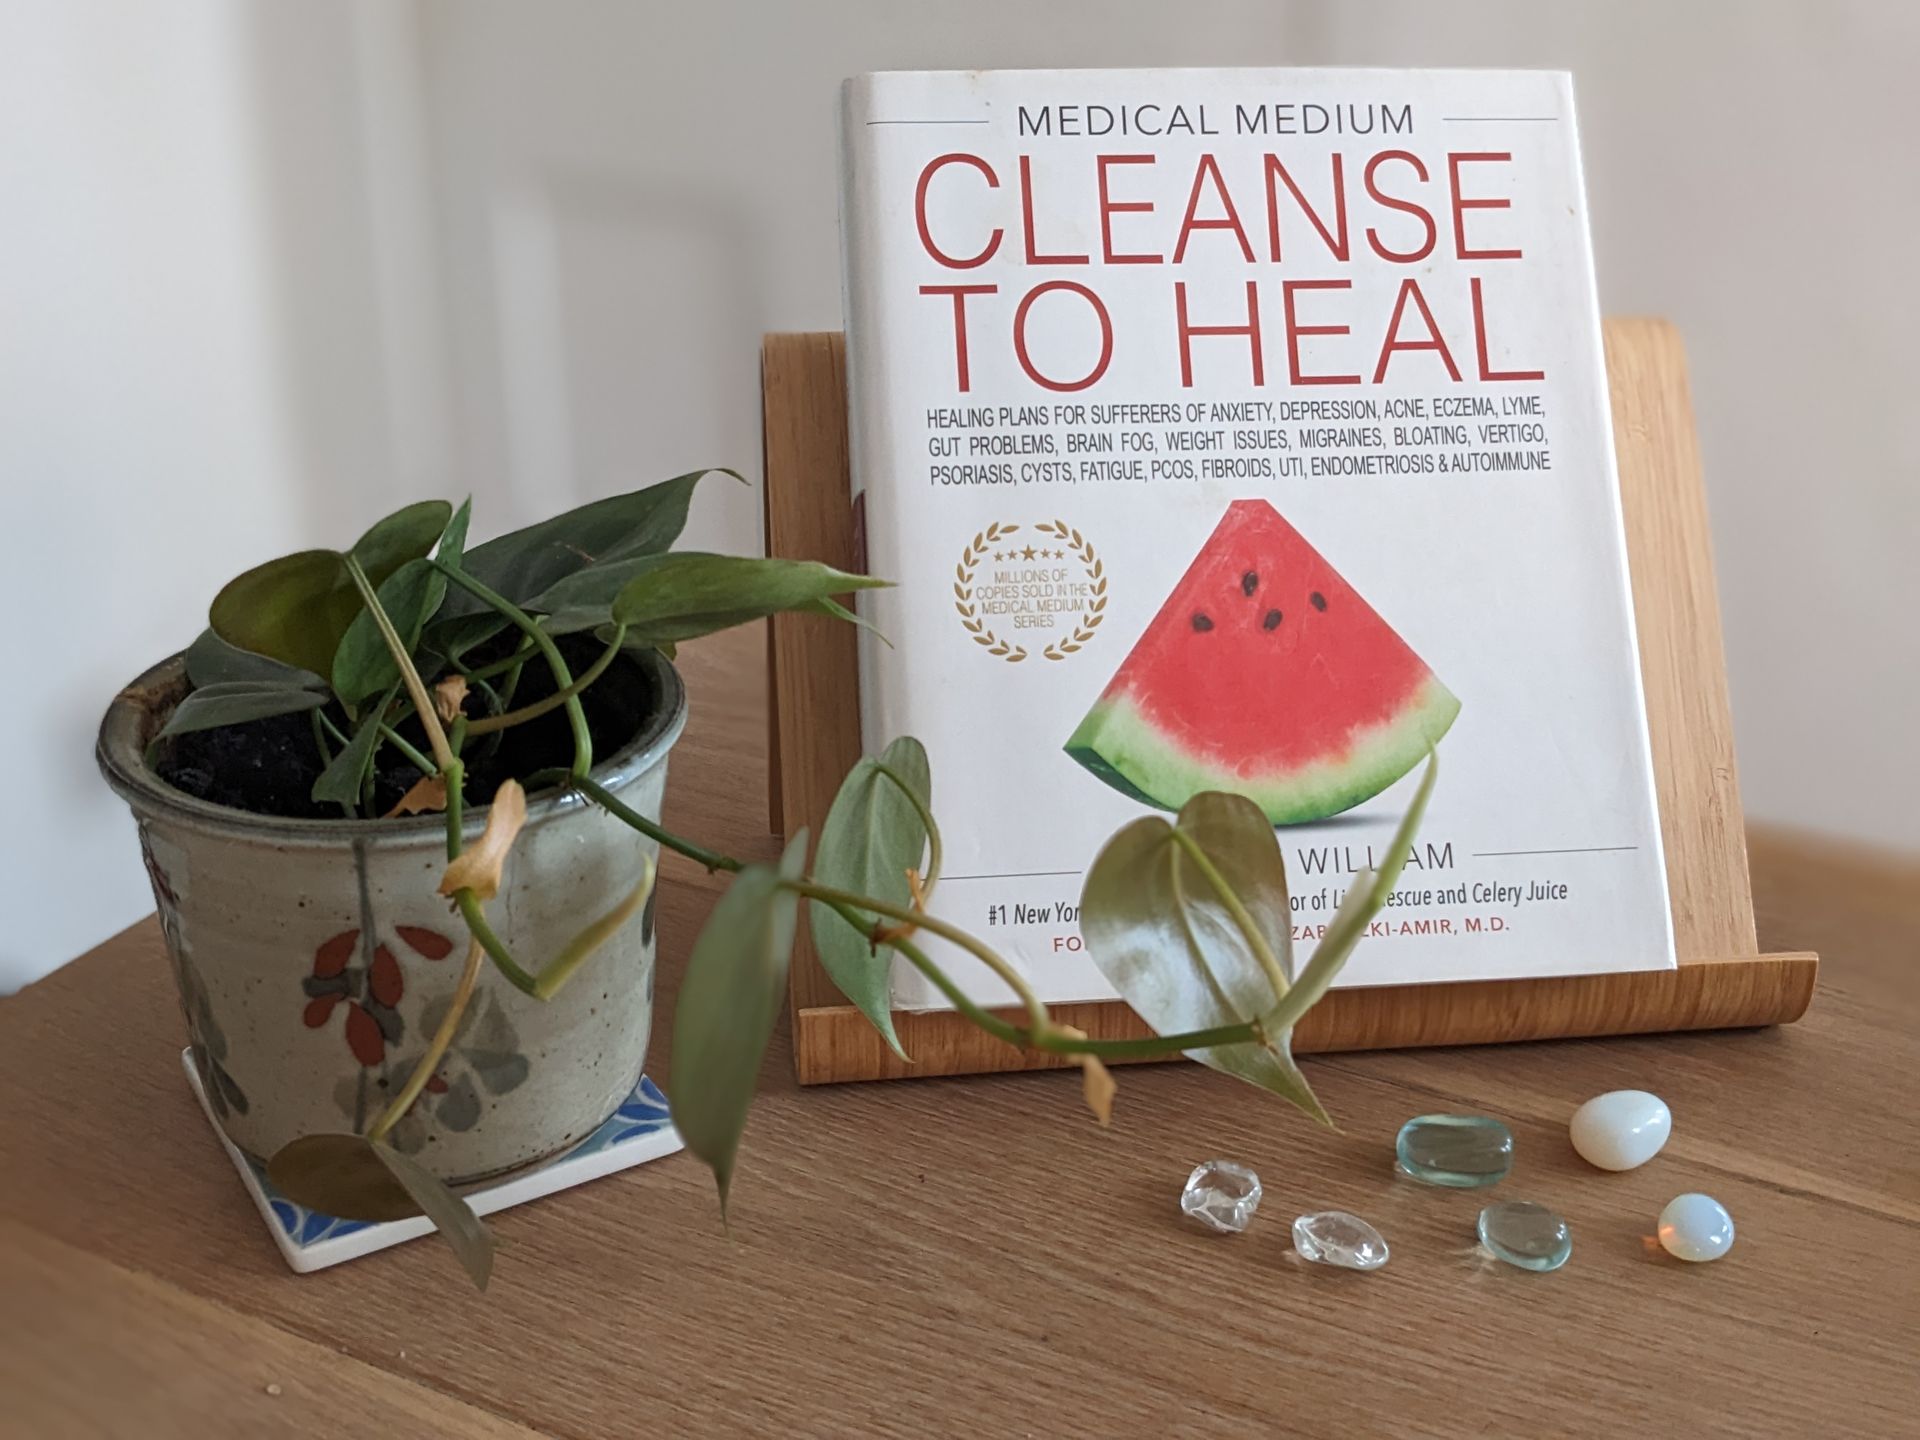 Cleanse to Heal by Anthony William - Book Review by Sue Cartwright, Spiral Leaf